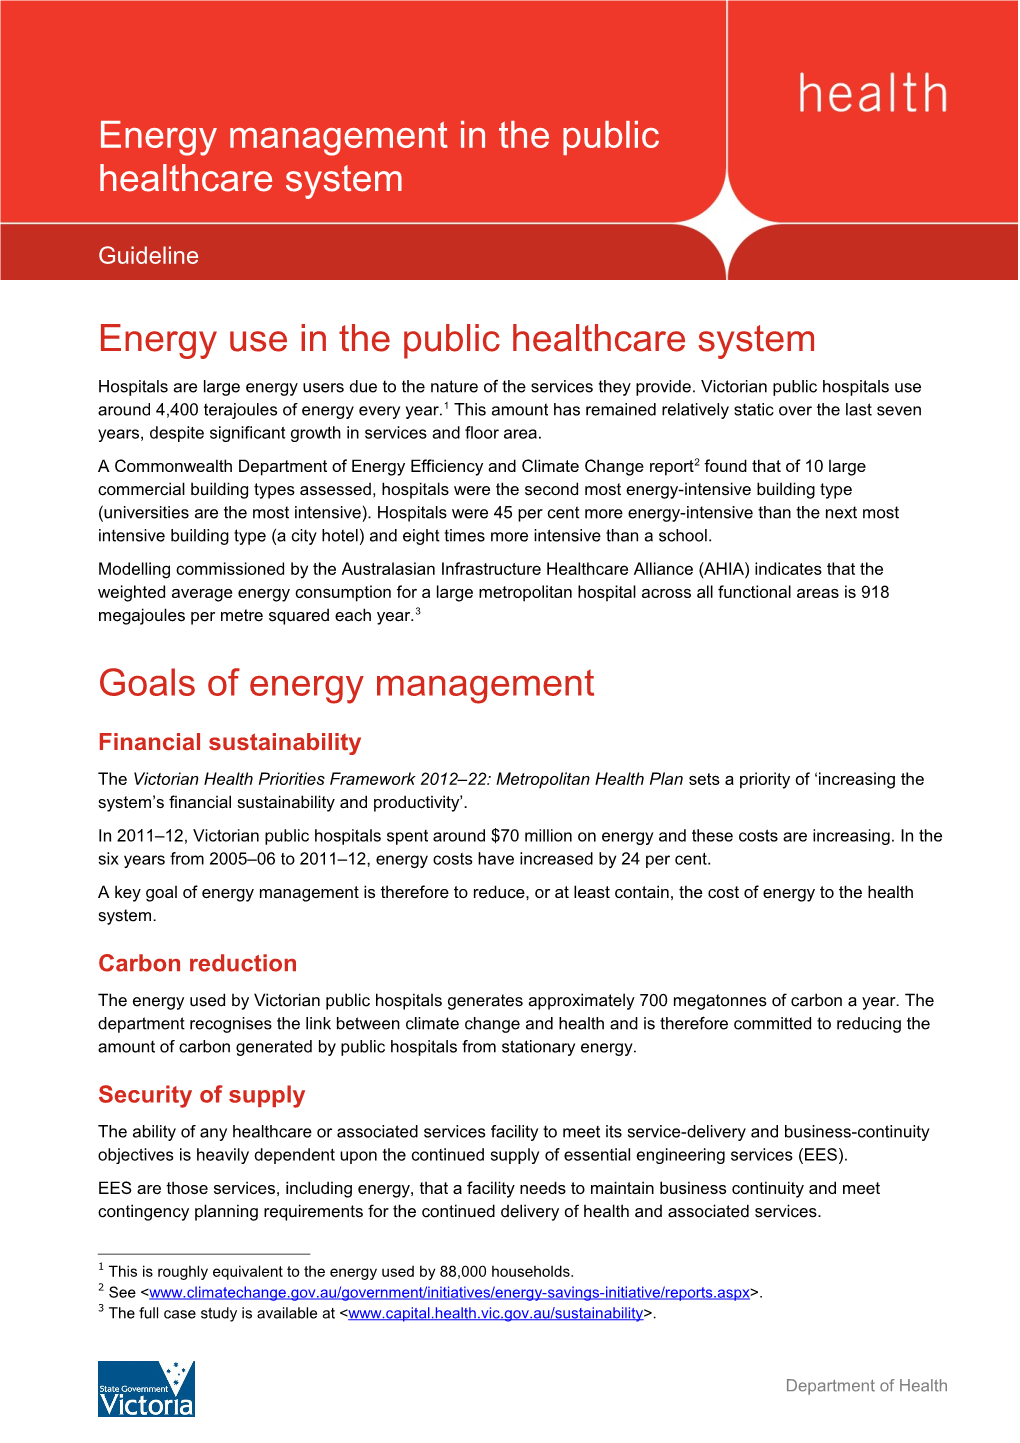 Energy Use in the Public Healthcare System